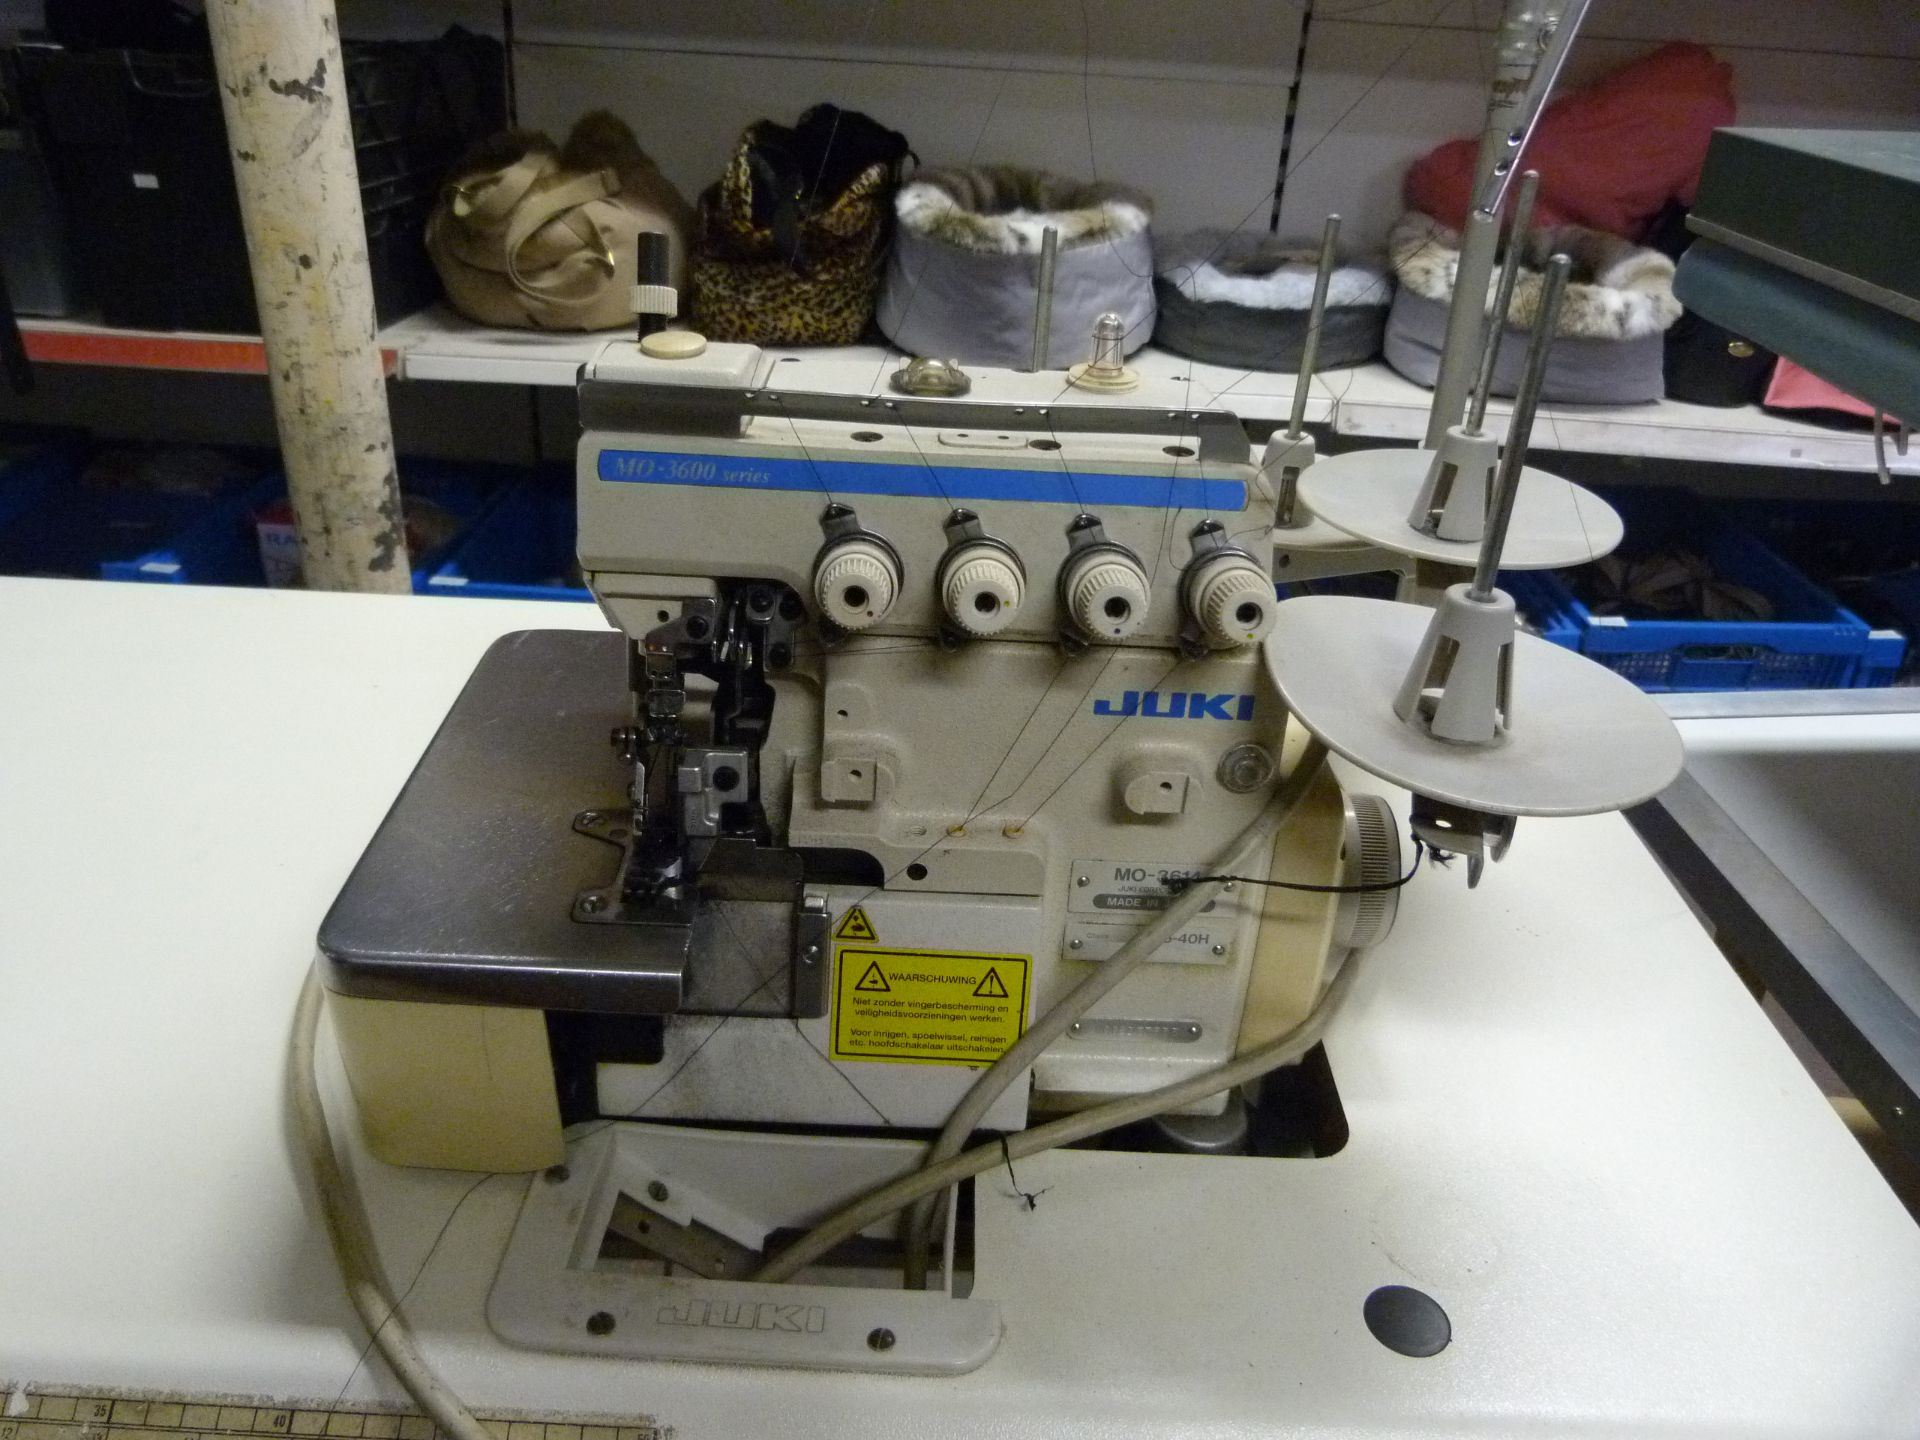 *Juki MO-3614 Sewing Machine - 240V Single Phase Fitted with 13 Amp Plug - Image 2 of 2